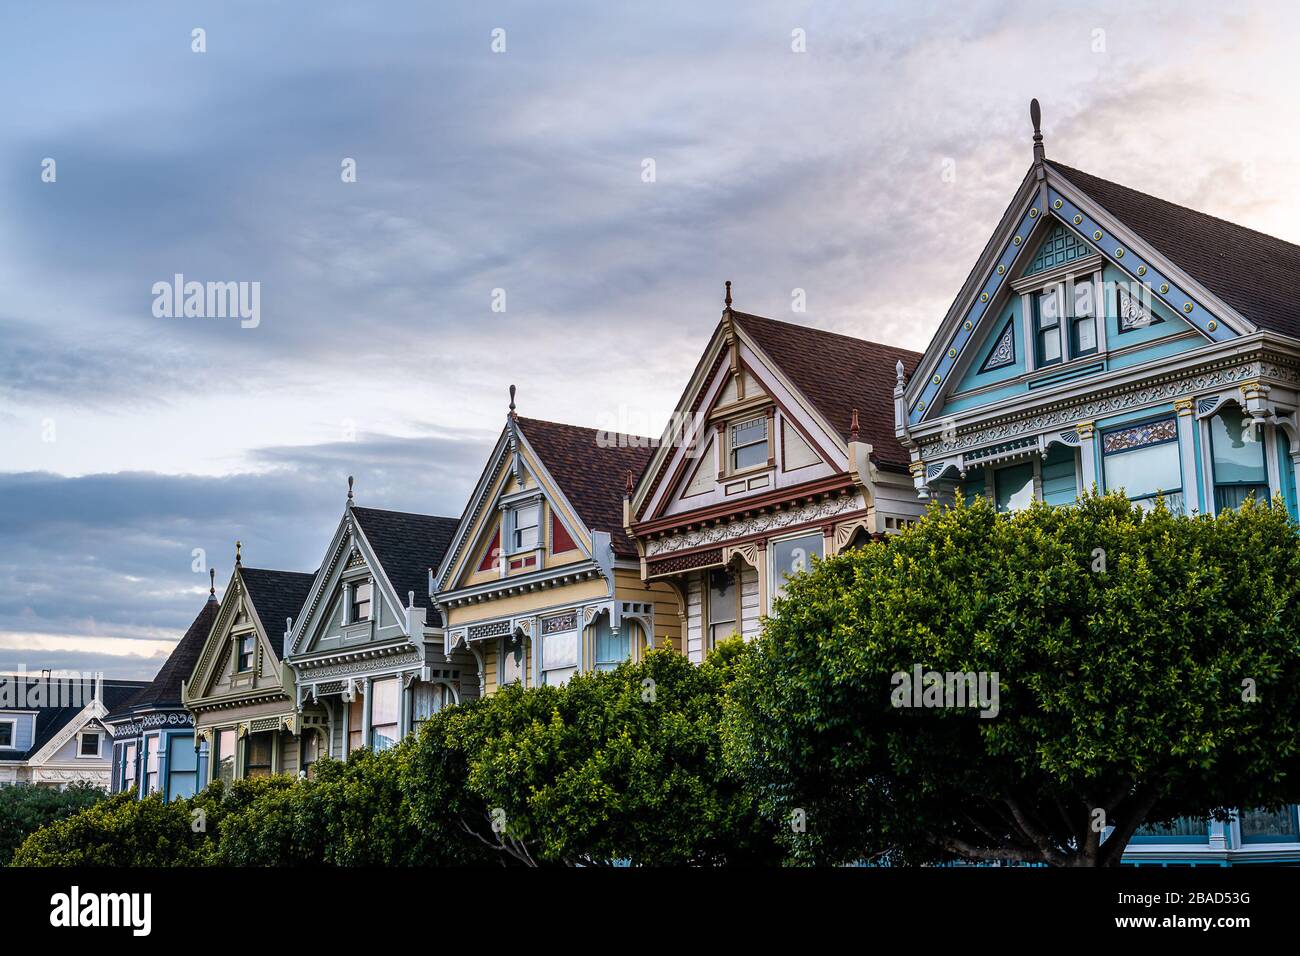 Sunrise over the Painted Ladies Stock Photo